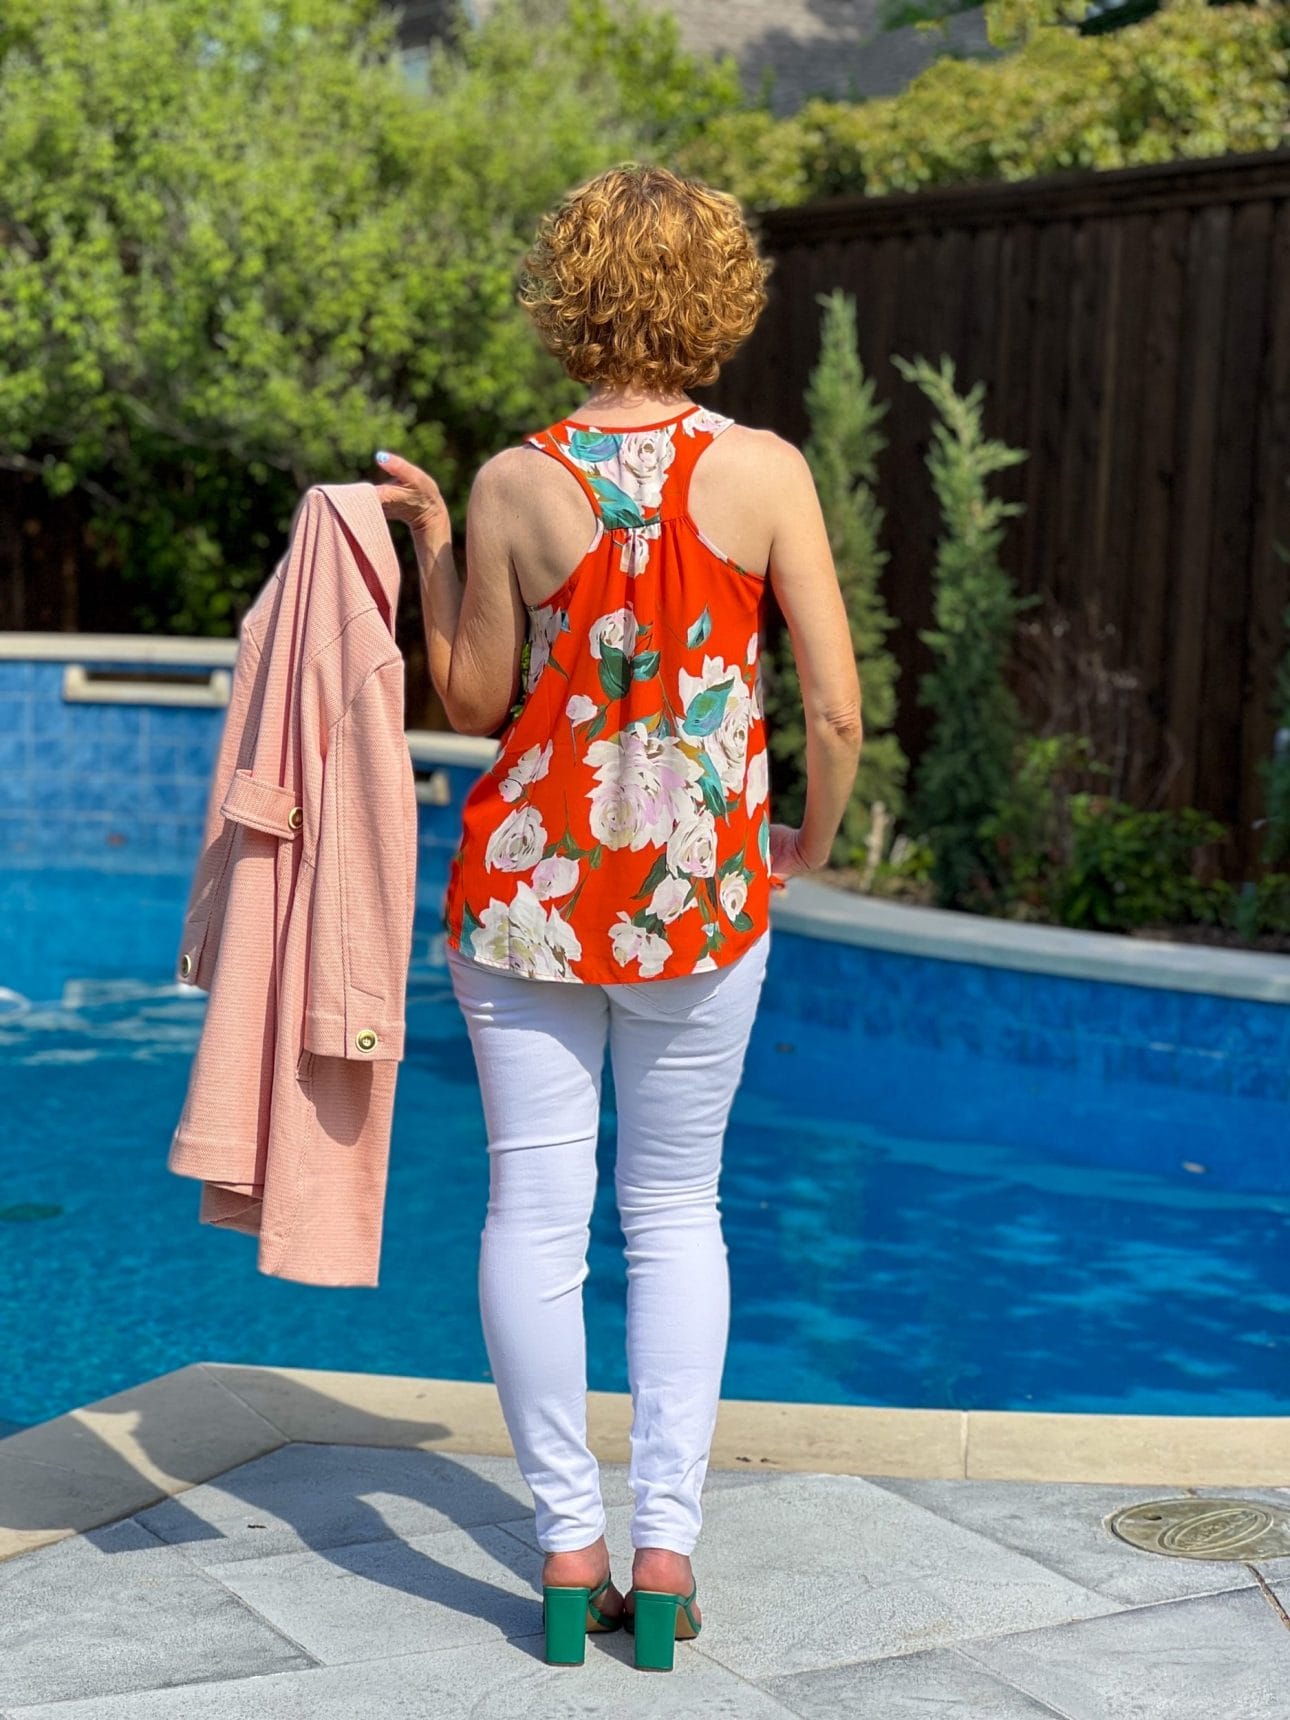 woman posing in cabi orange floral top and white skinny jeans by pool with jacket in her hand facing backwards